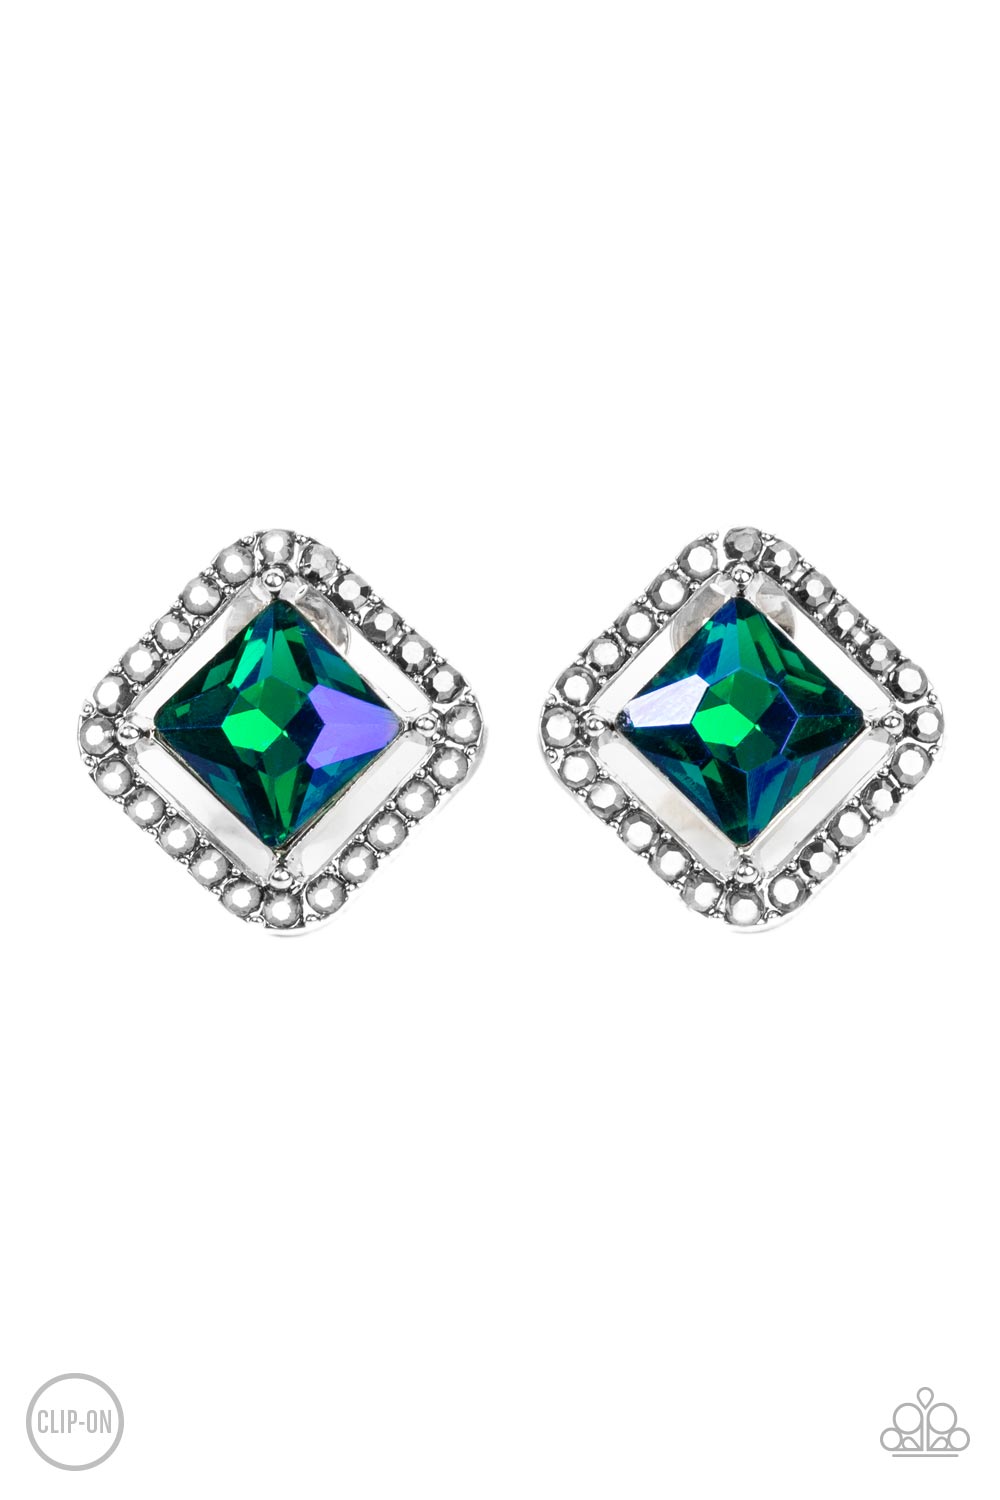 Cosmic Catwalk Green Clip-On Earrings - Paparazzi Accessories- lightbox - CarasShop.com - $5 Jewelry by Cara Jewels